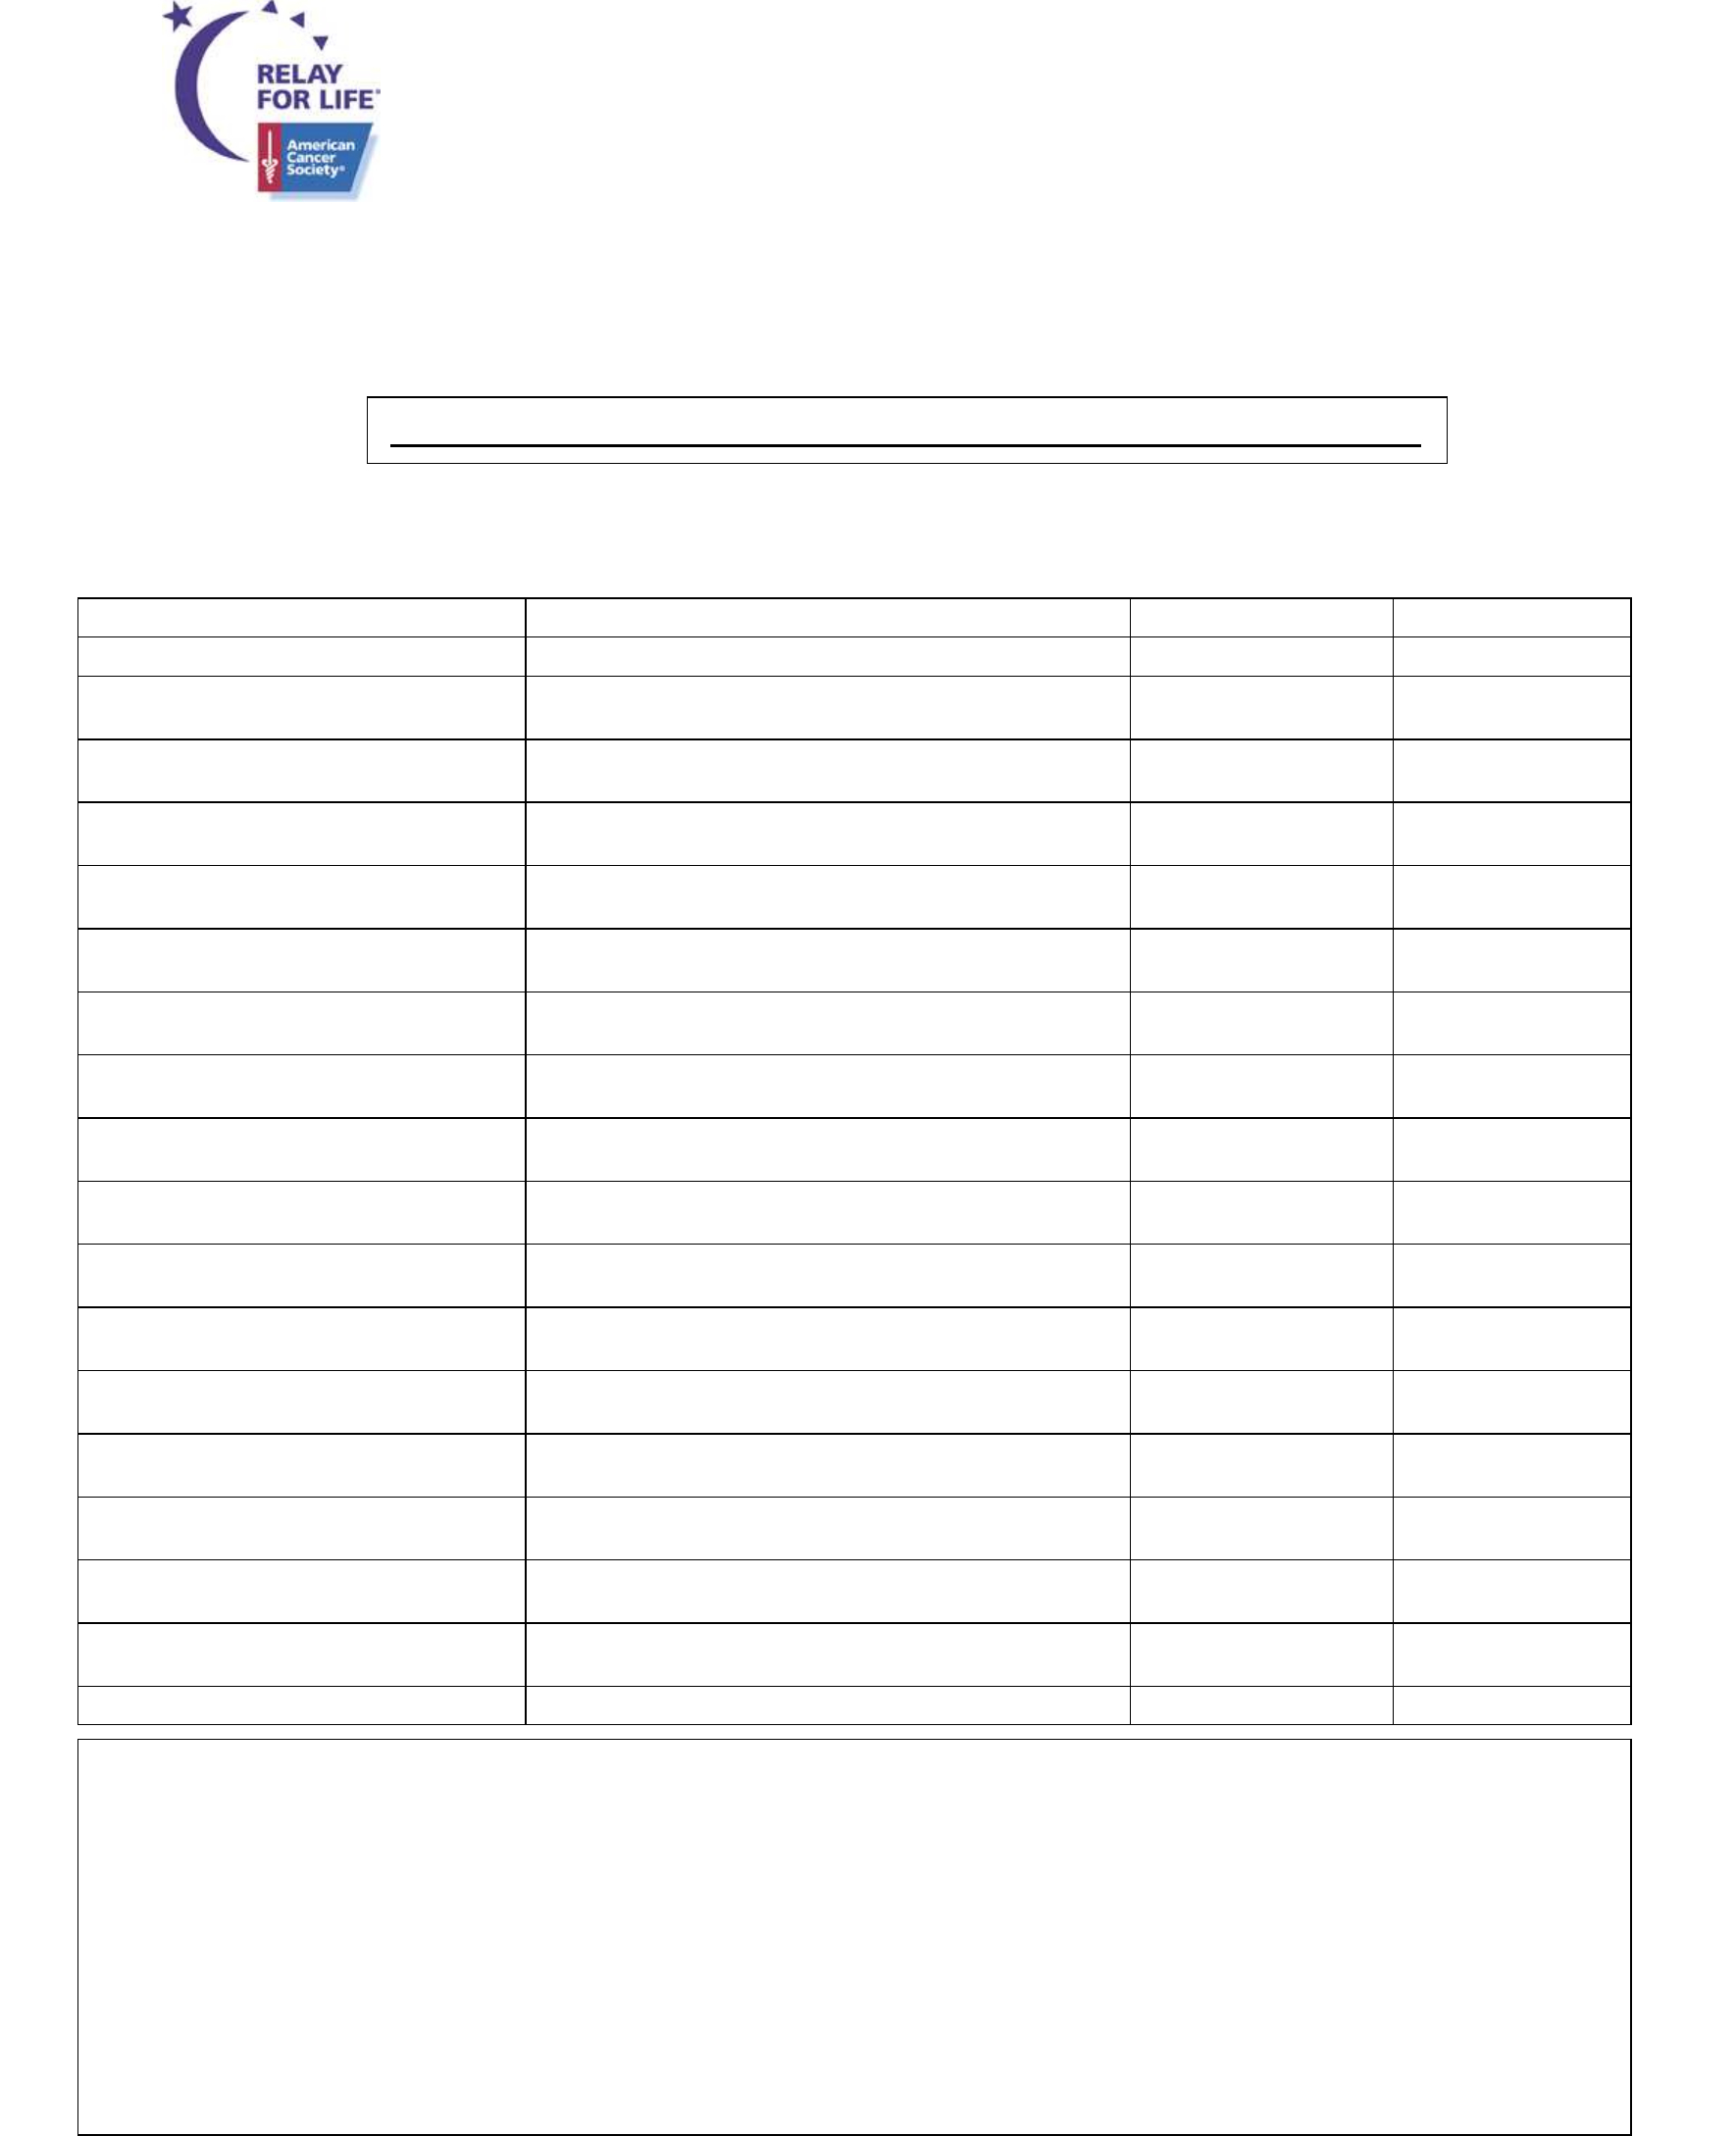 Relay For Life Donation Form – America Free Download Throughout Blank Sponsor Form Template Free